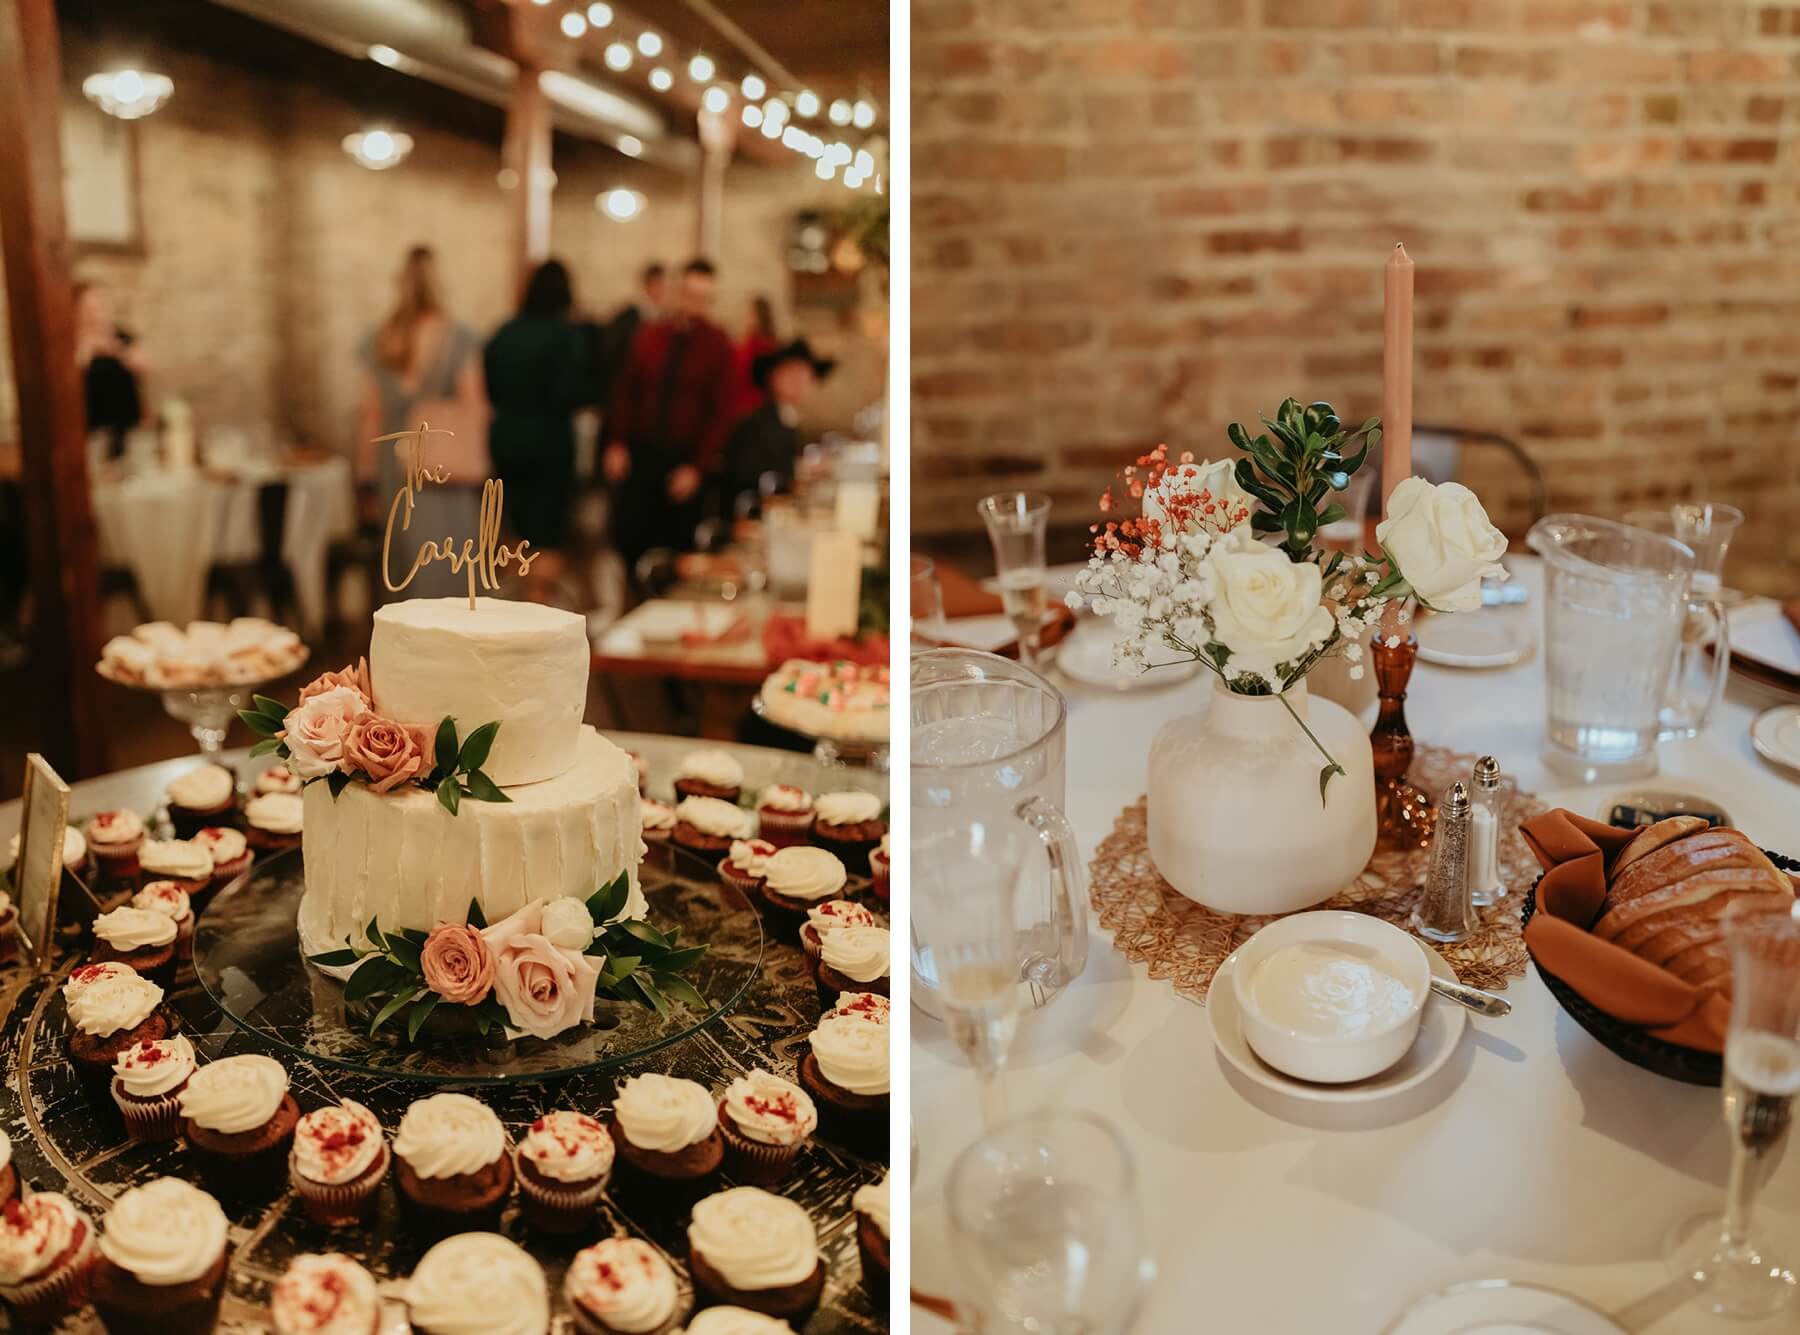 Dessert table and guest table with orange and white details